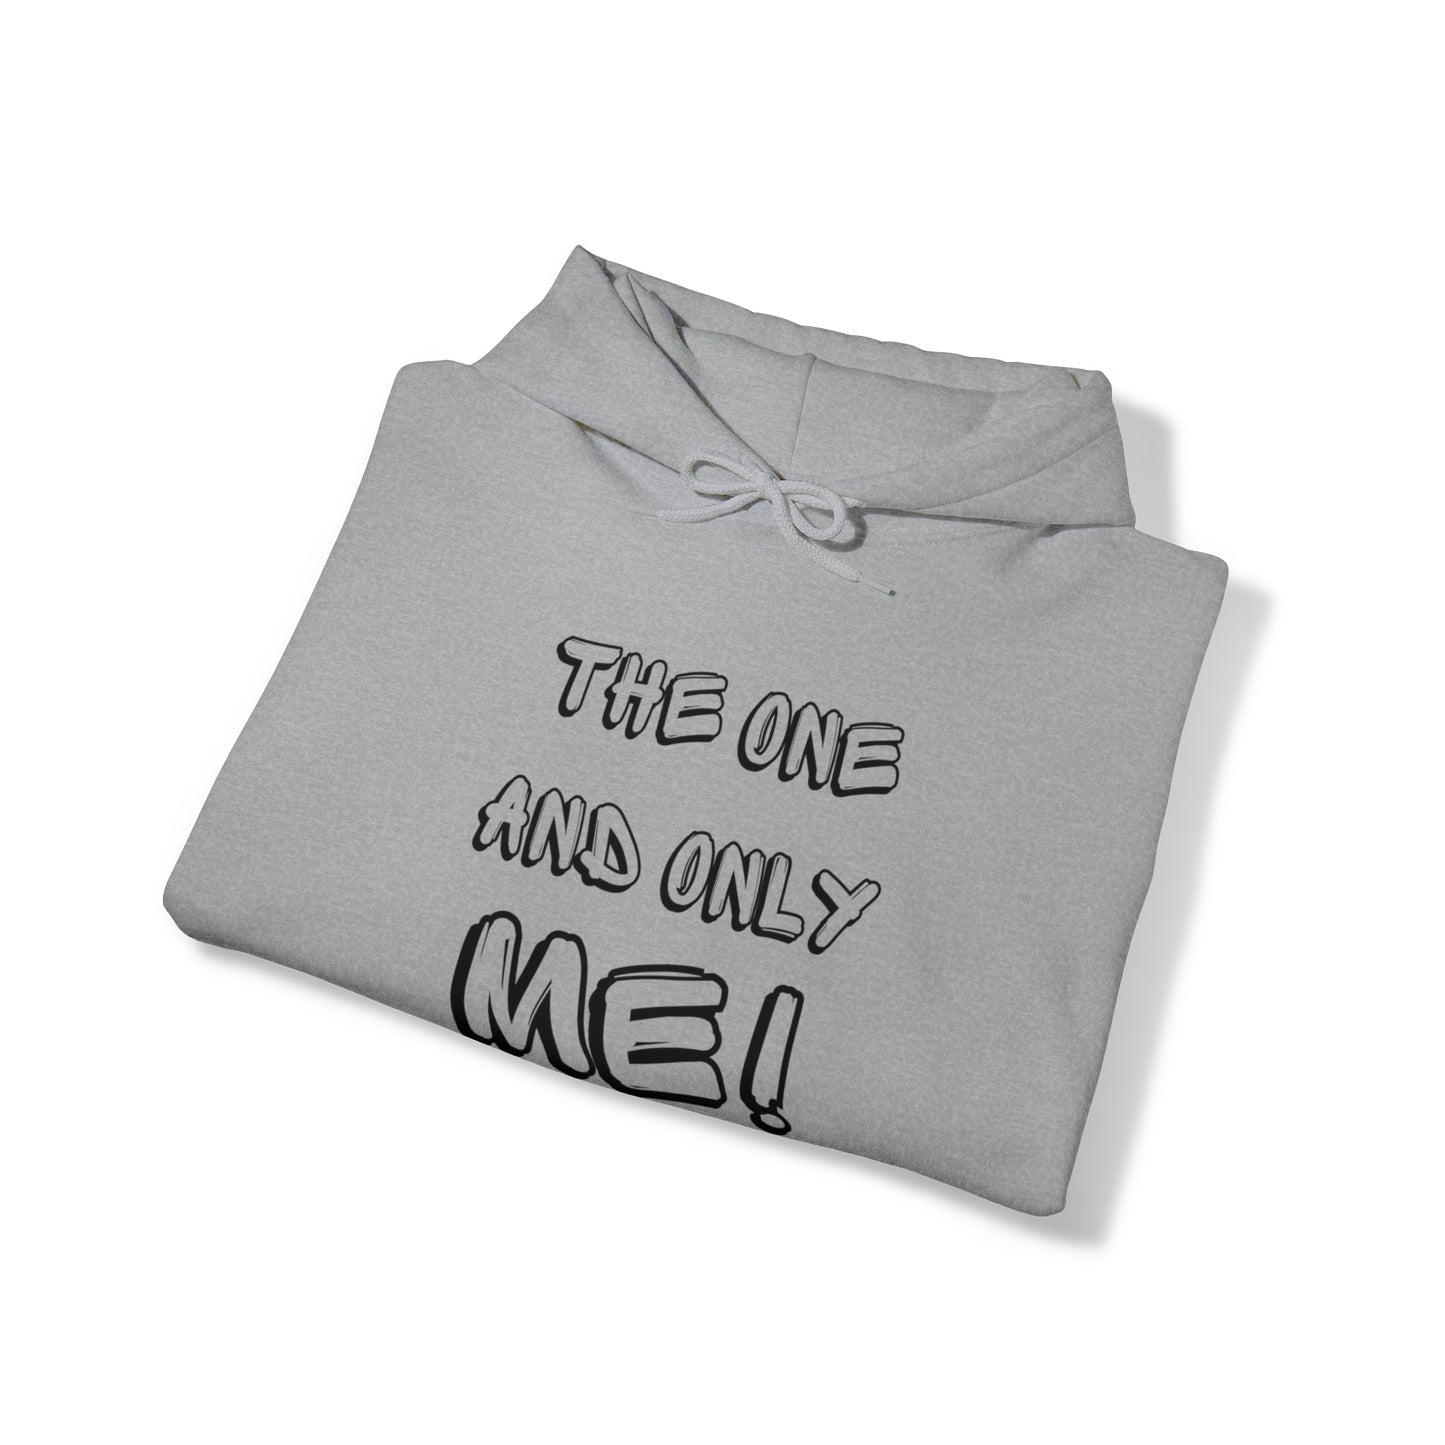 The One and Only Me! Hooded Sweatshirt - InkArt Fashions